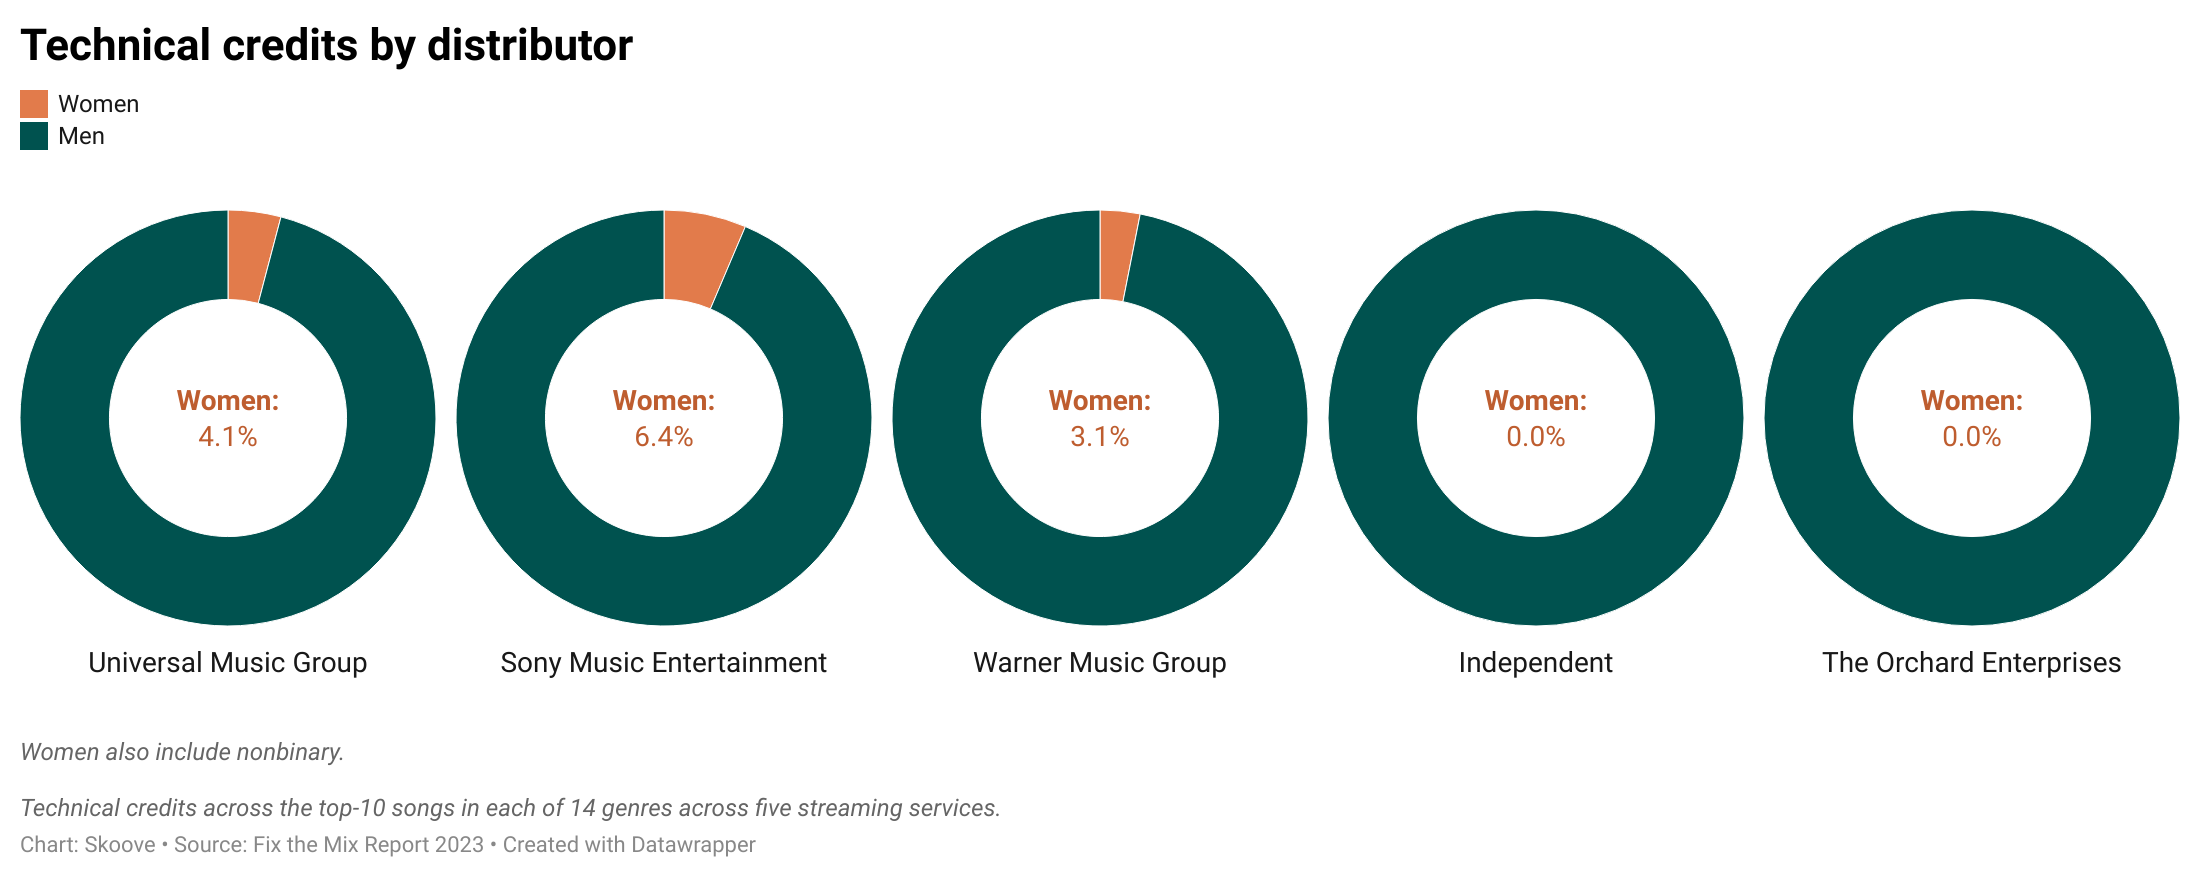 Pie charts on gender of technical credits by distributor.